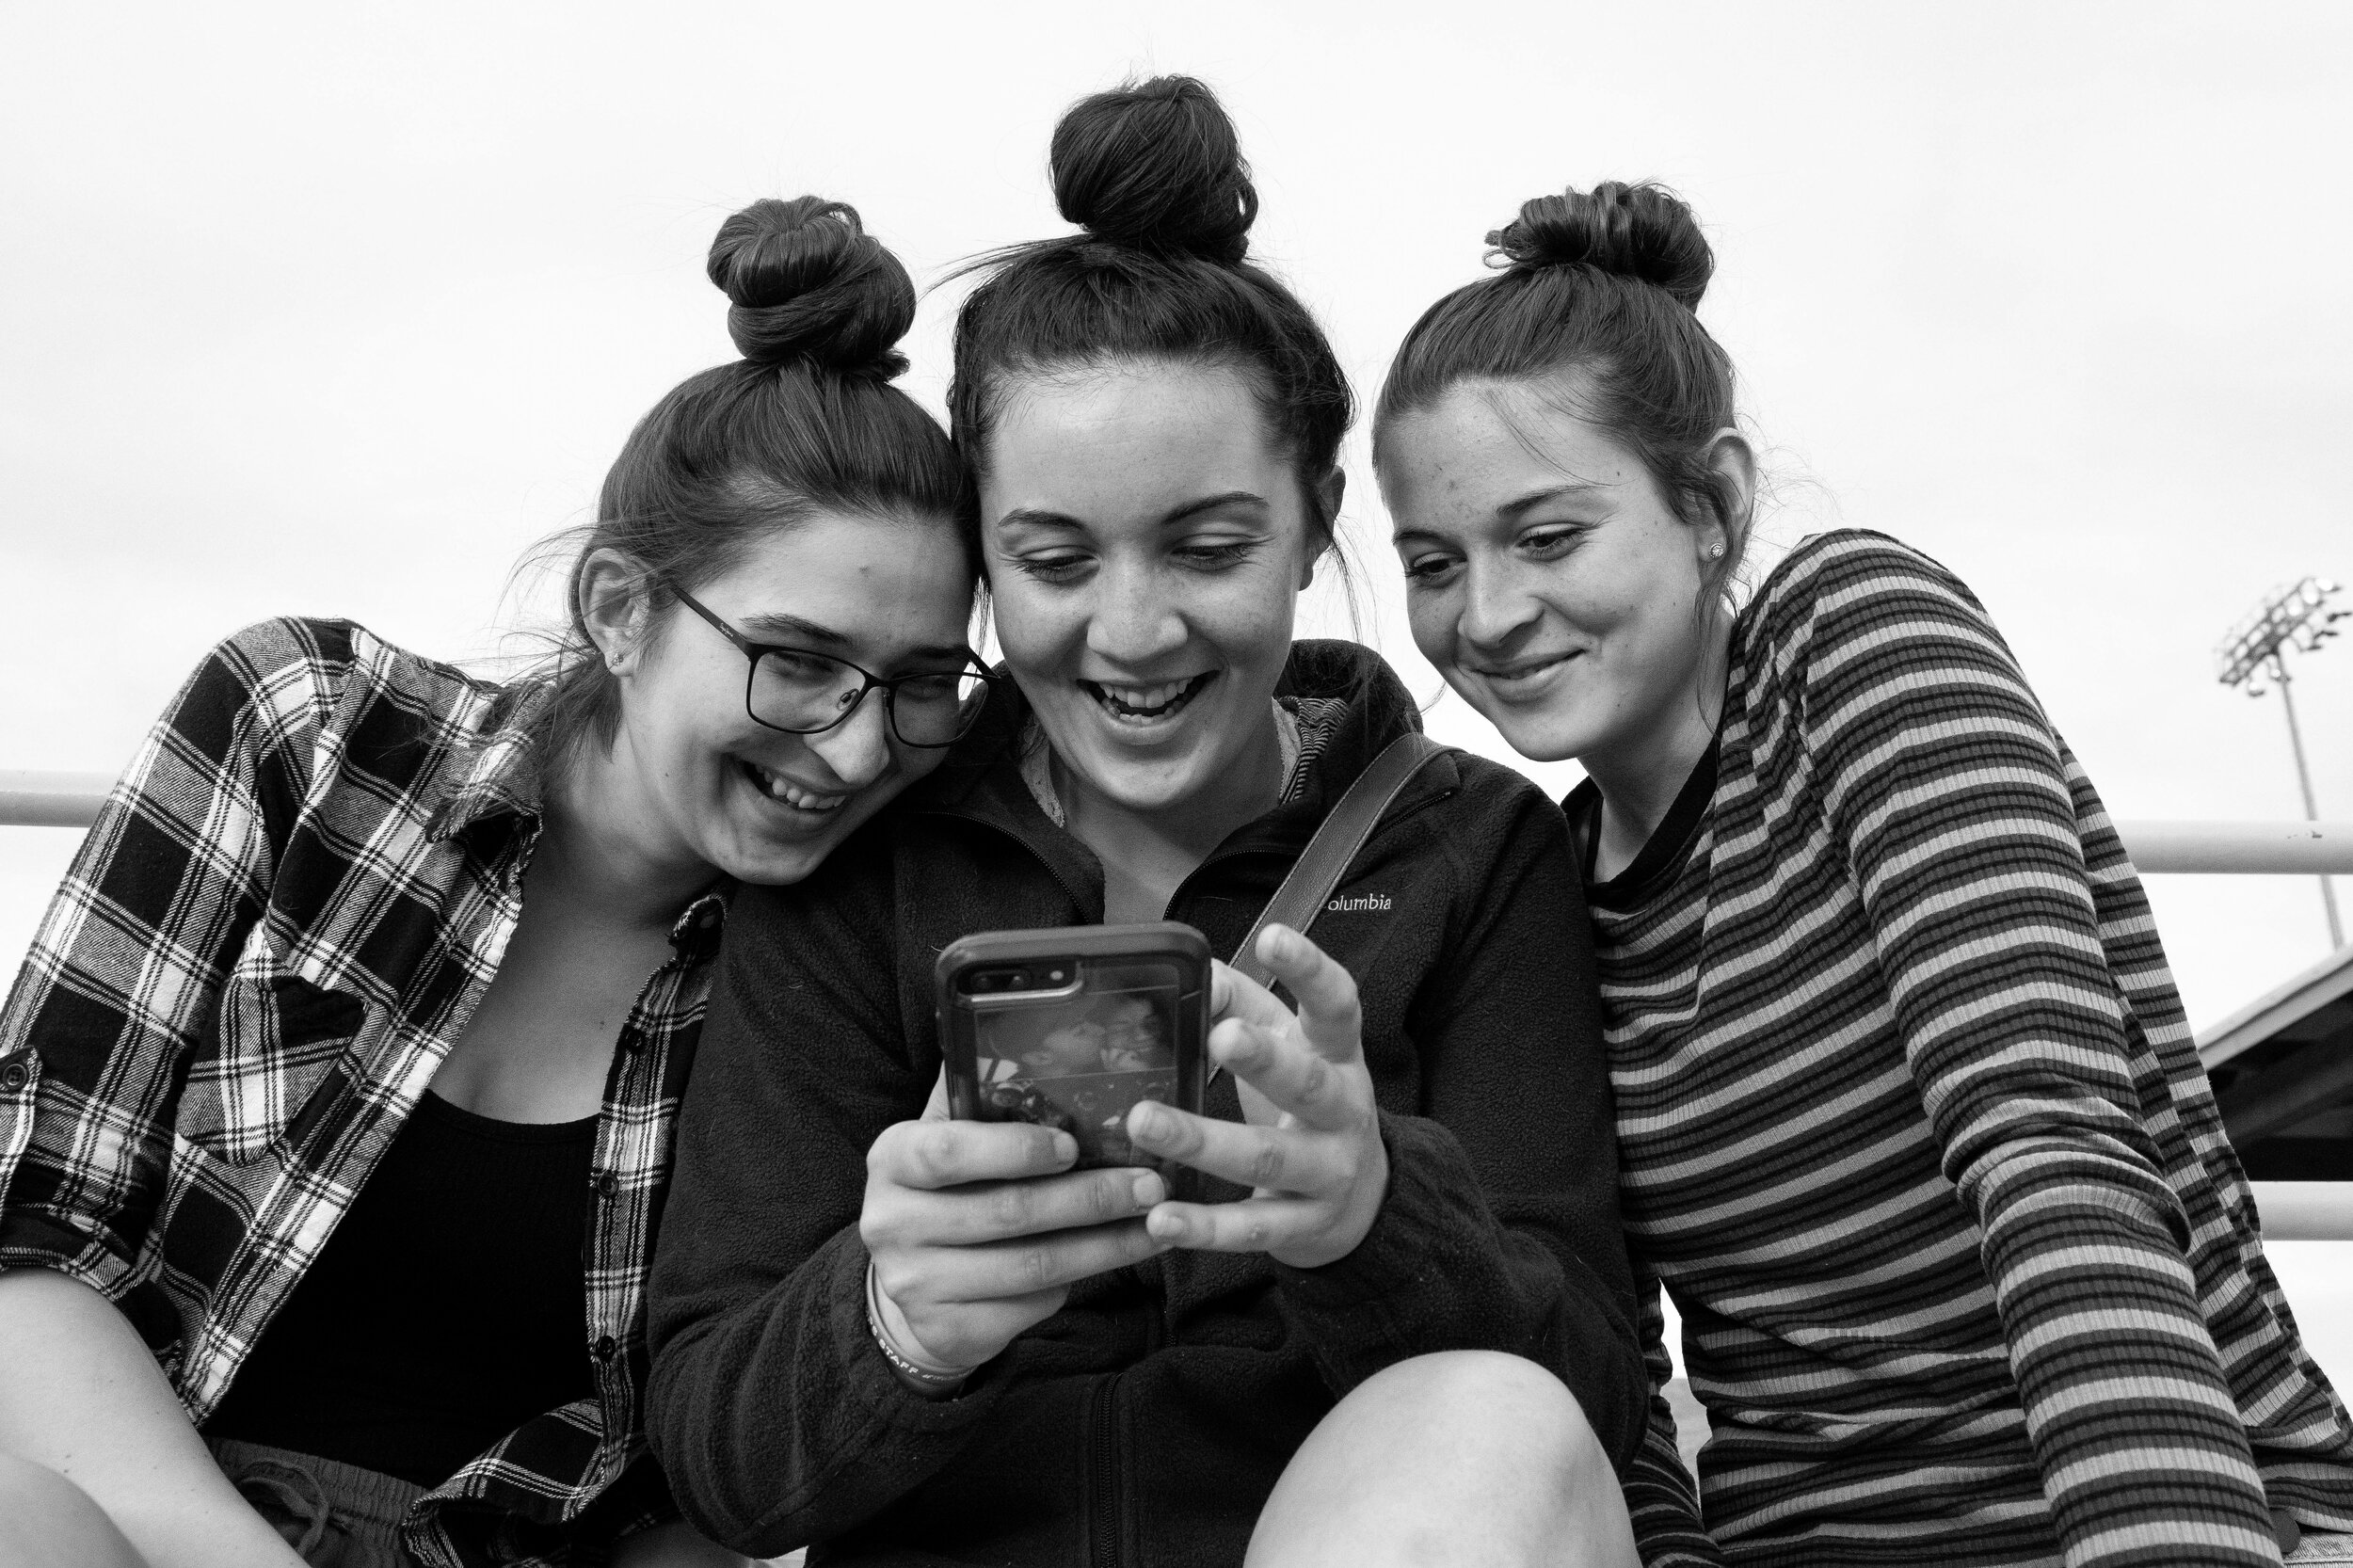  Sierra, middle, and her sisters laugh at their selfie during their little brother Zachary's baseball game Wednesday evening in Farmington, N.M. 